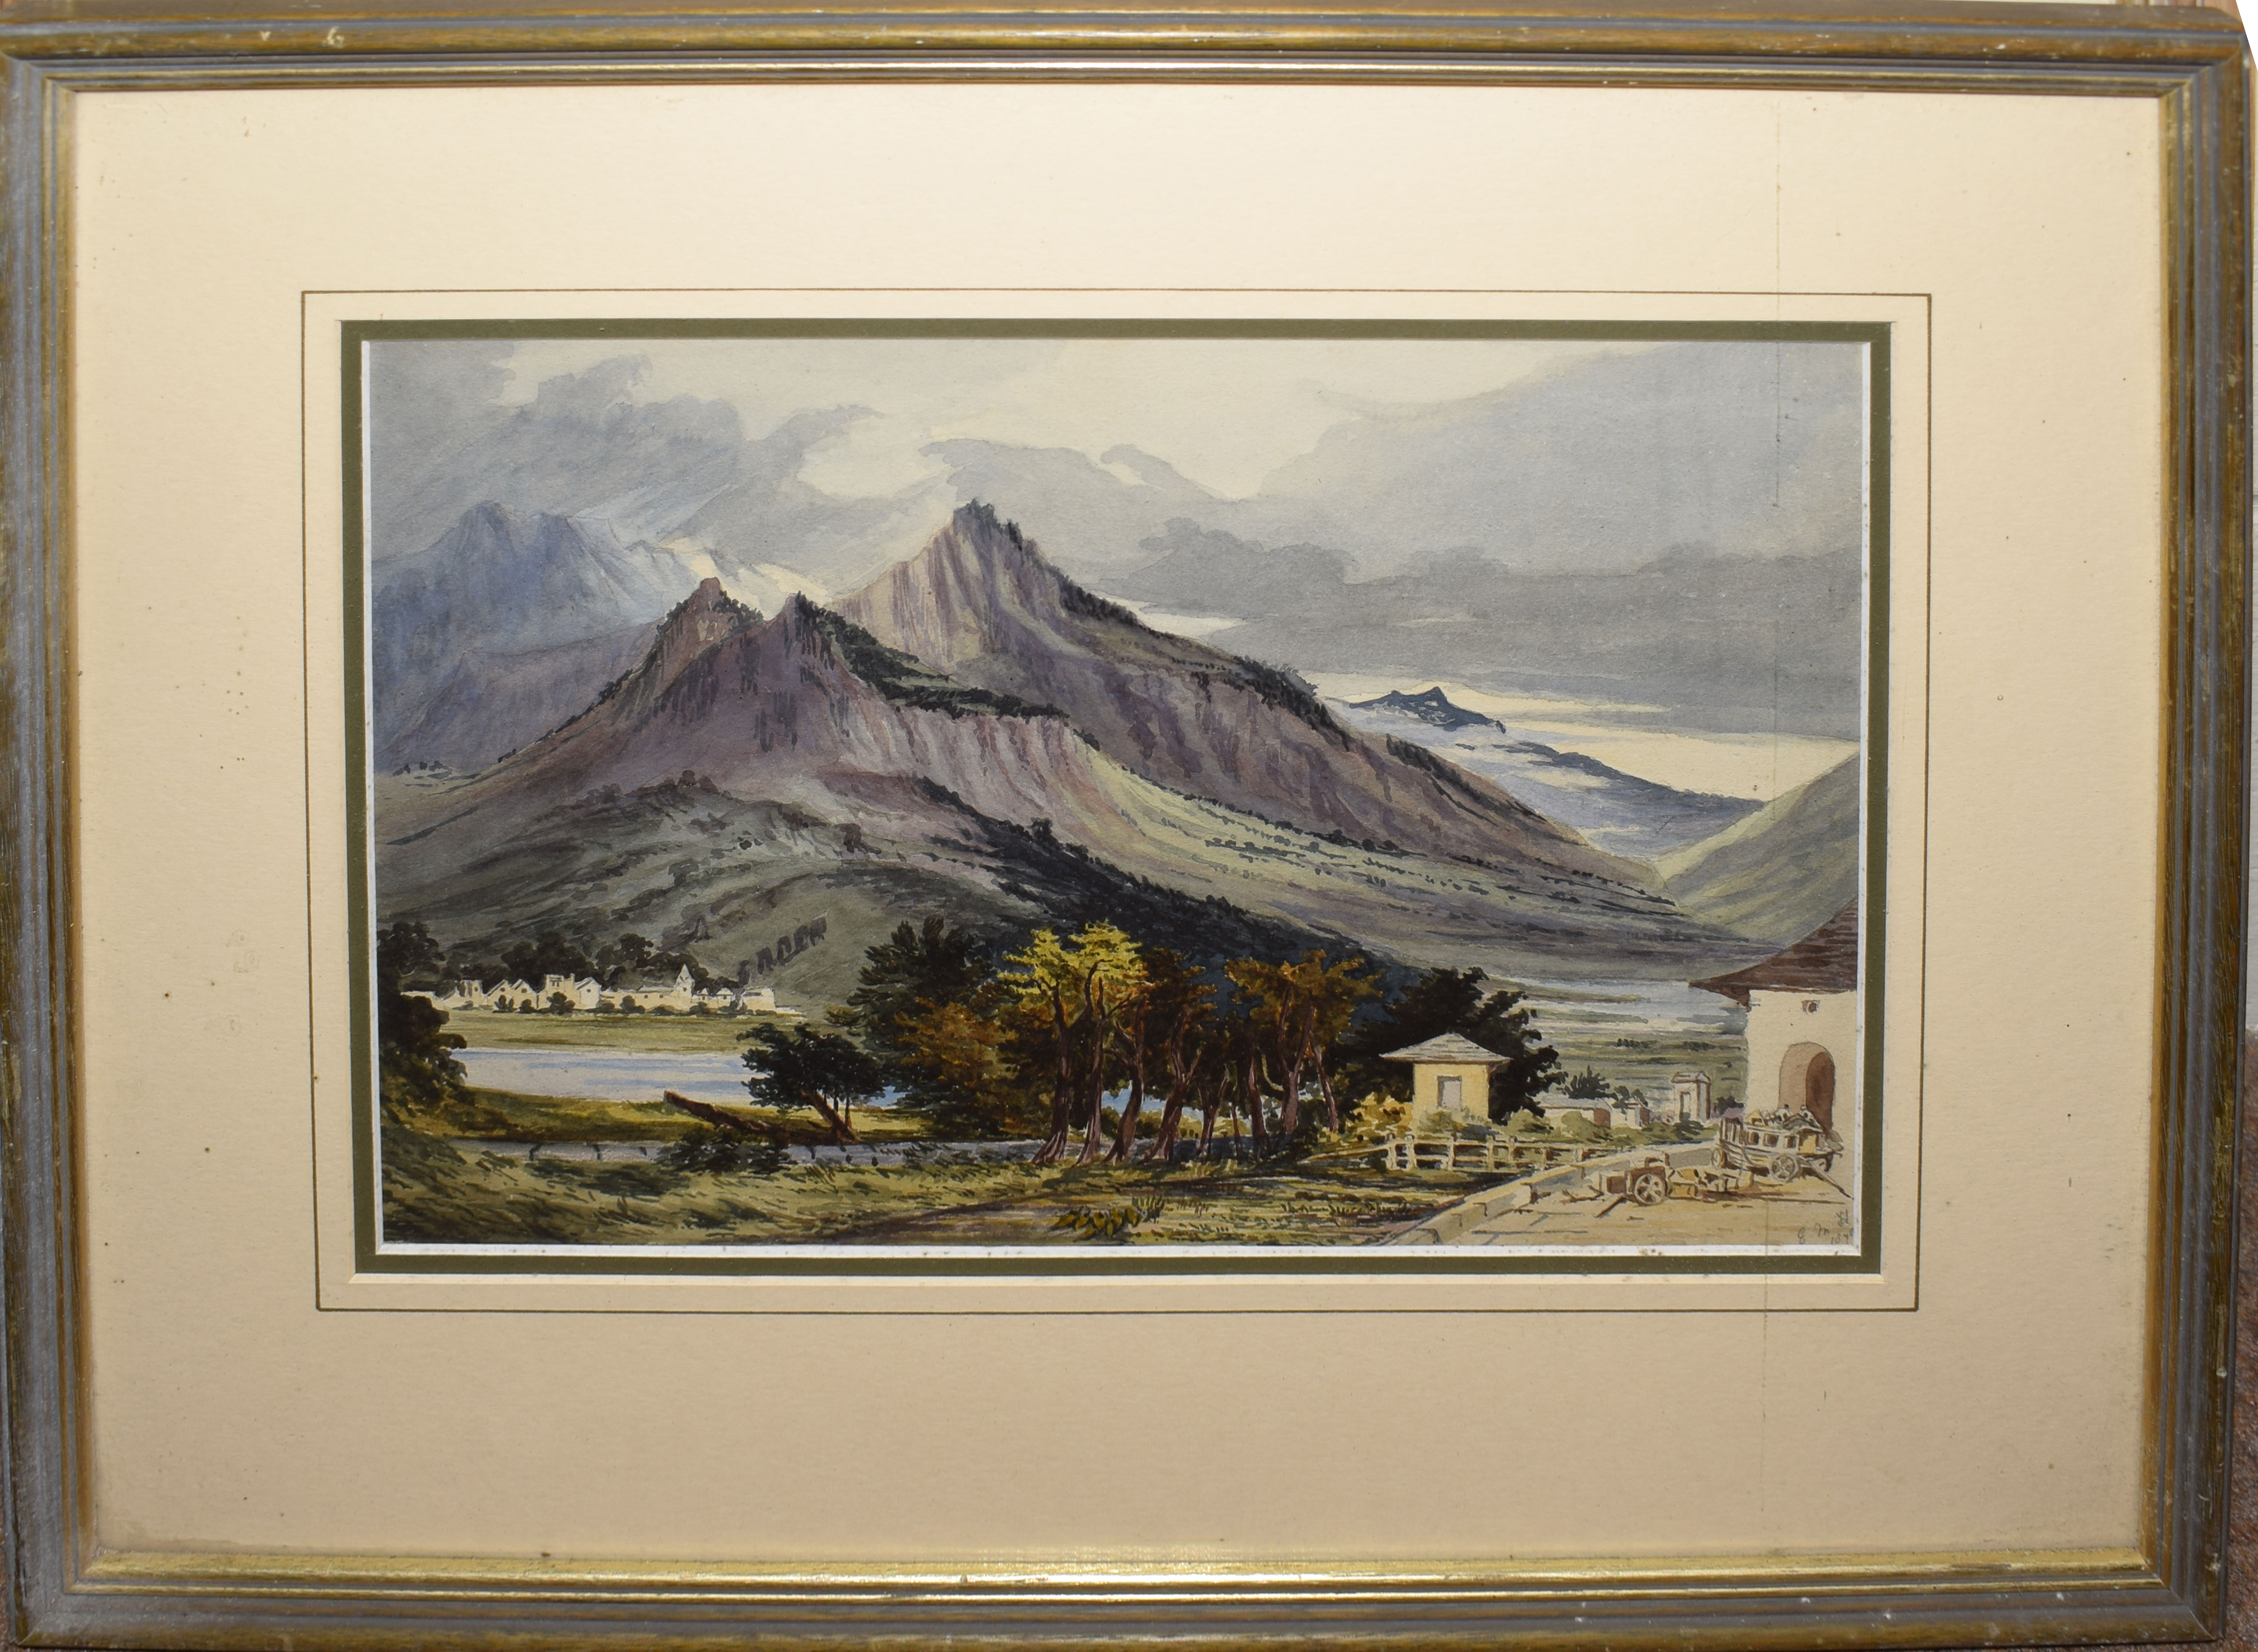 E M H (19TH CENTURY), Mountain landscape, watercolour, initialled and dated 1870 lower right, - Image 2 of 5